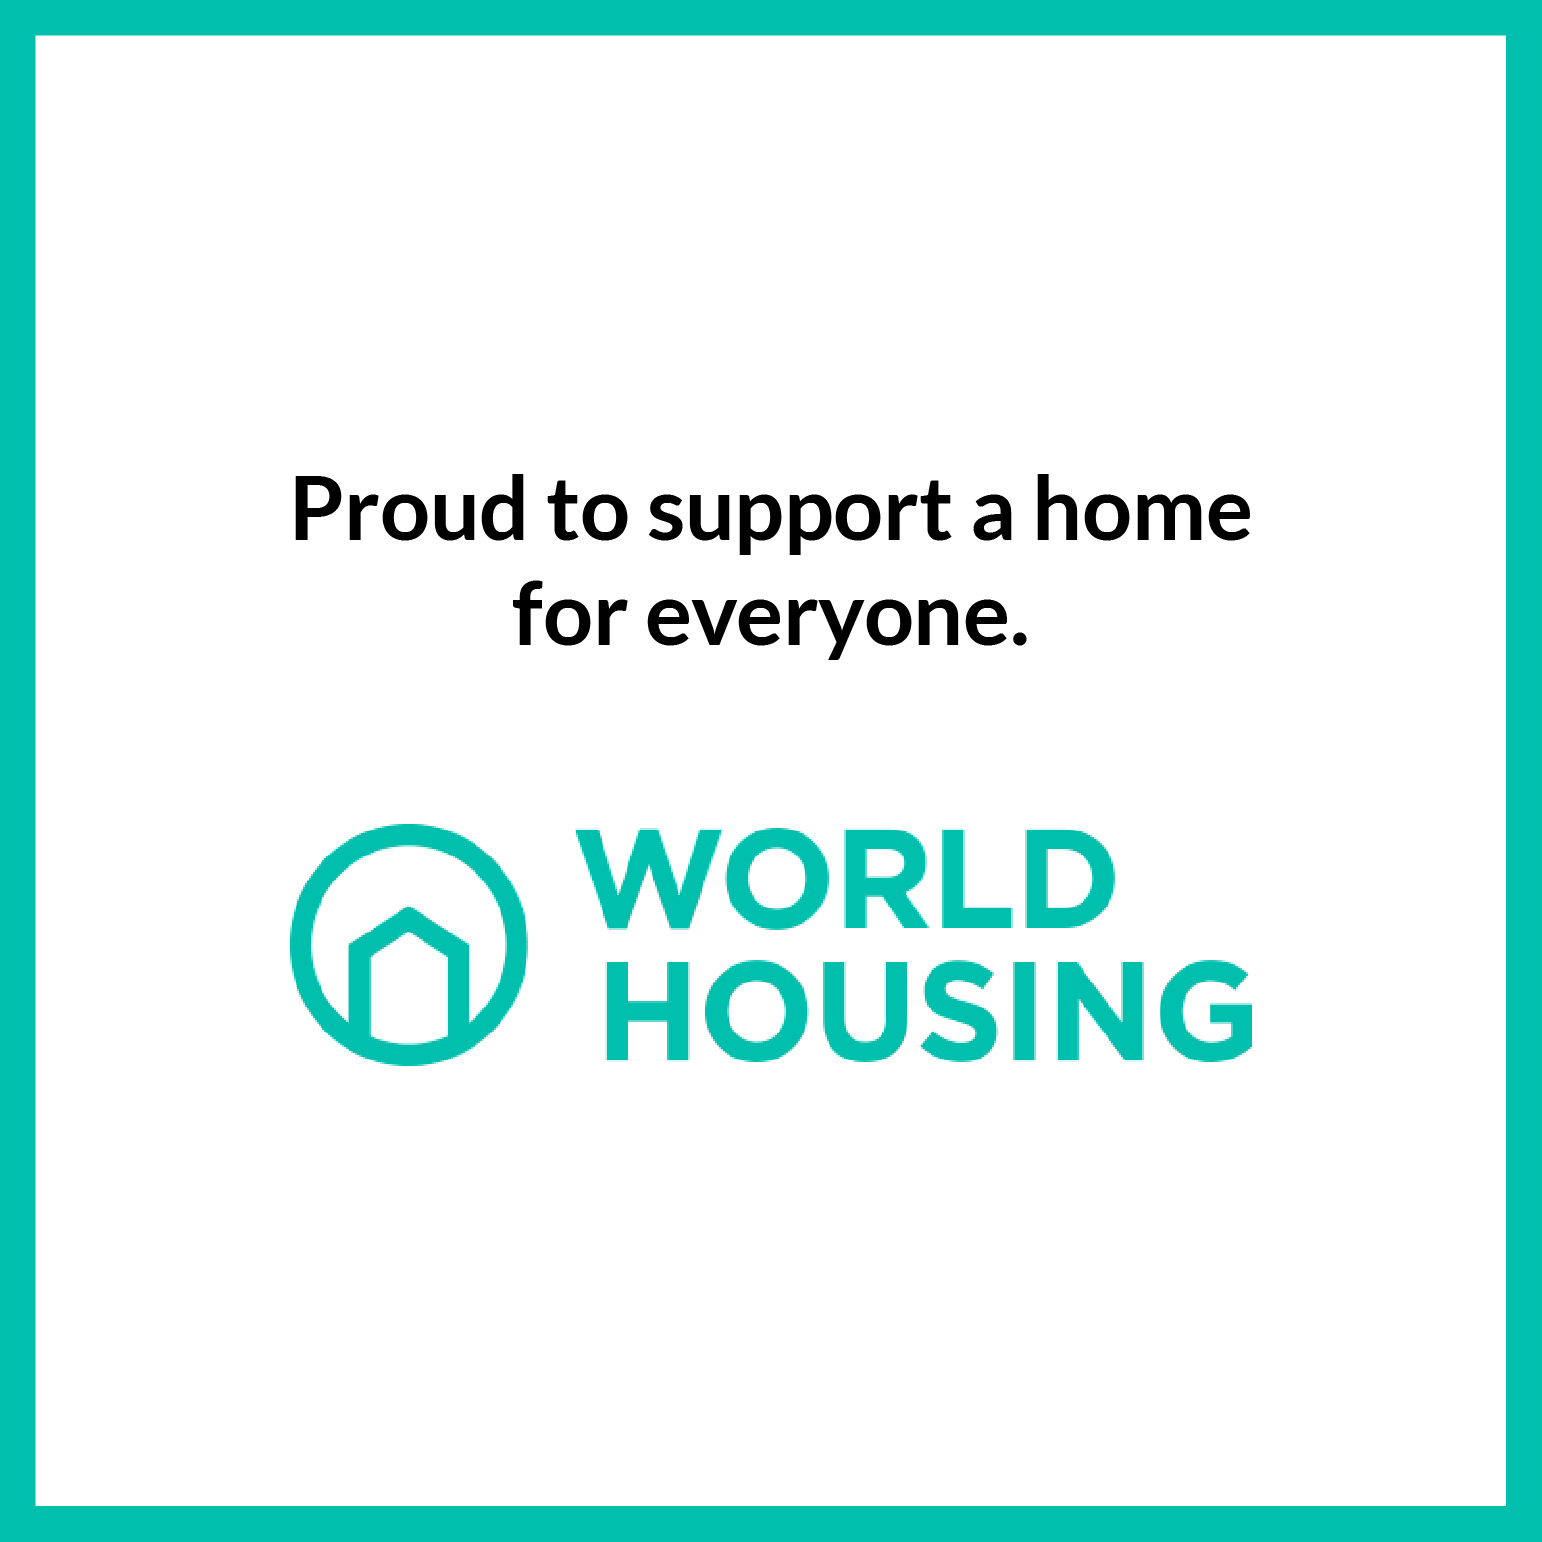 Chicago Title is proud to support World Housing